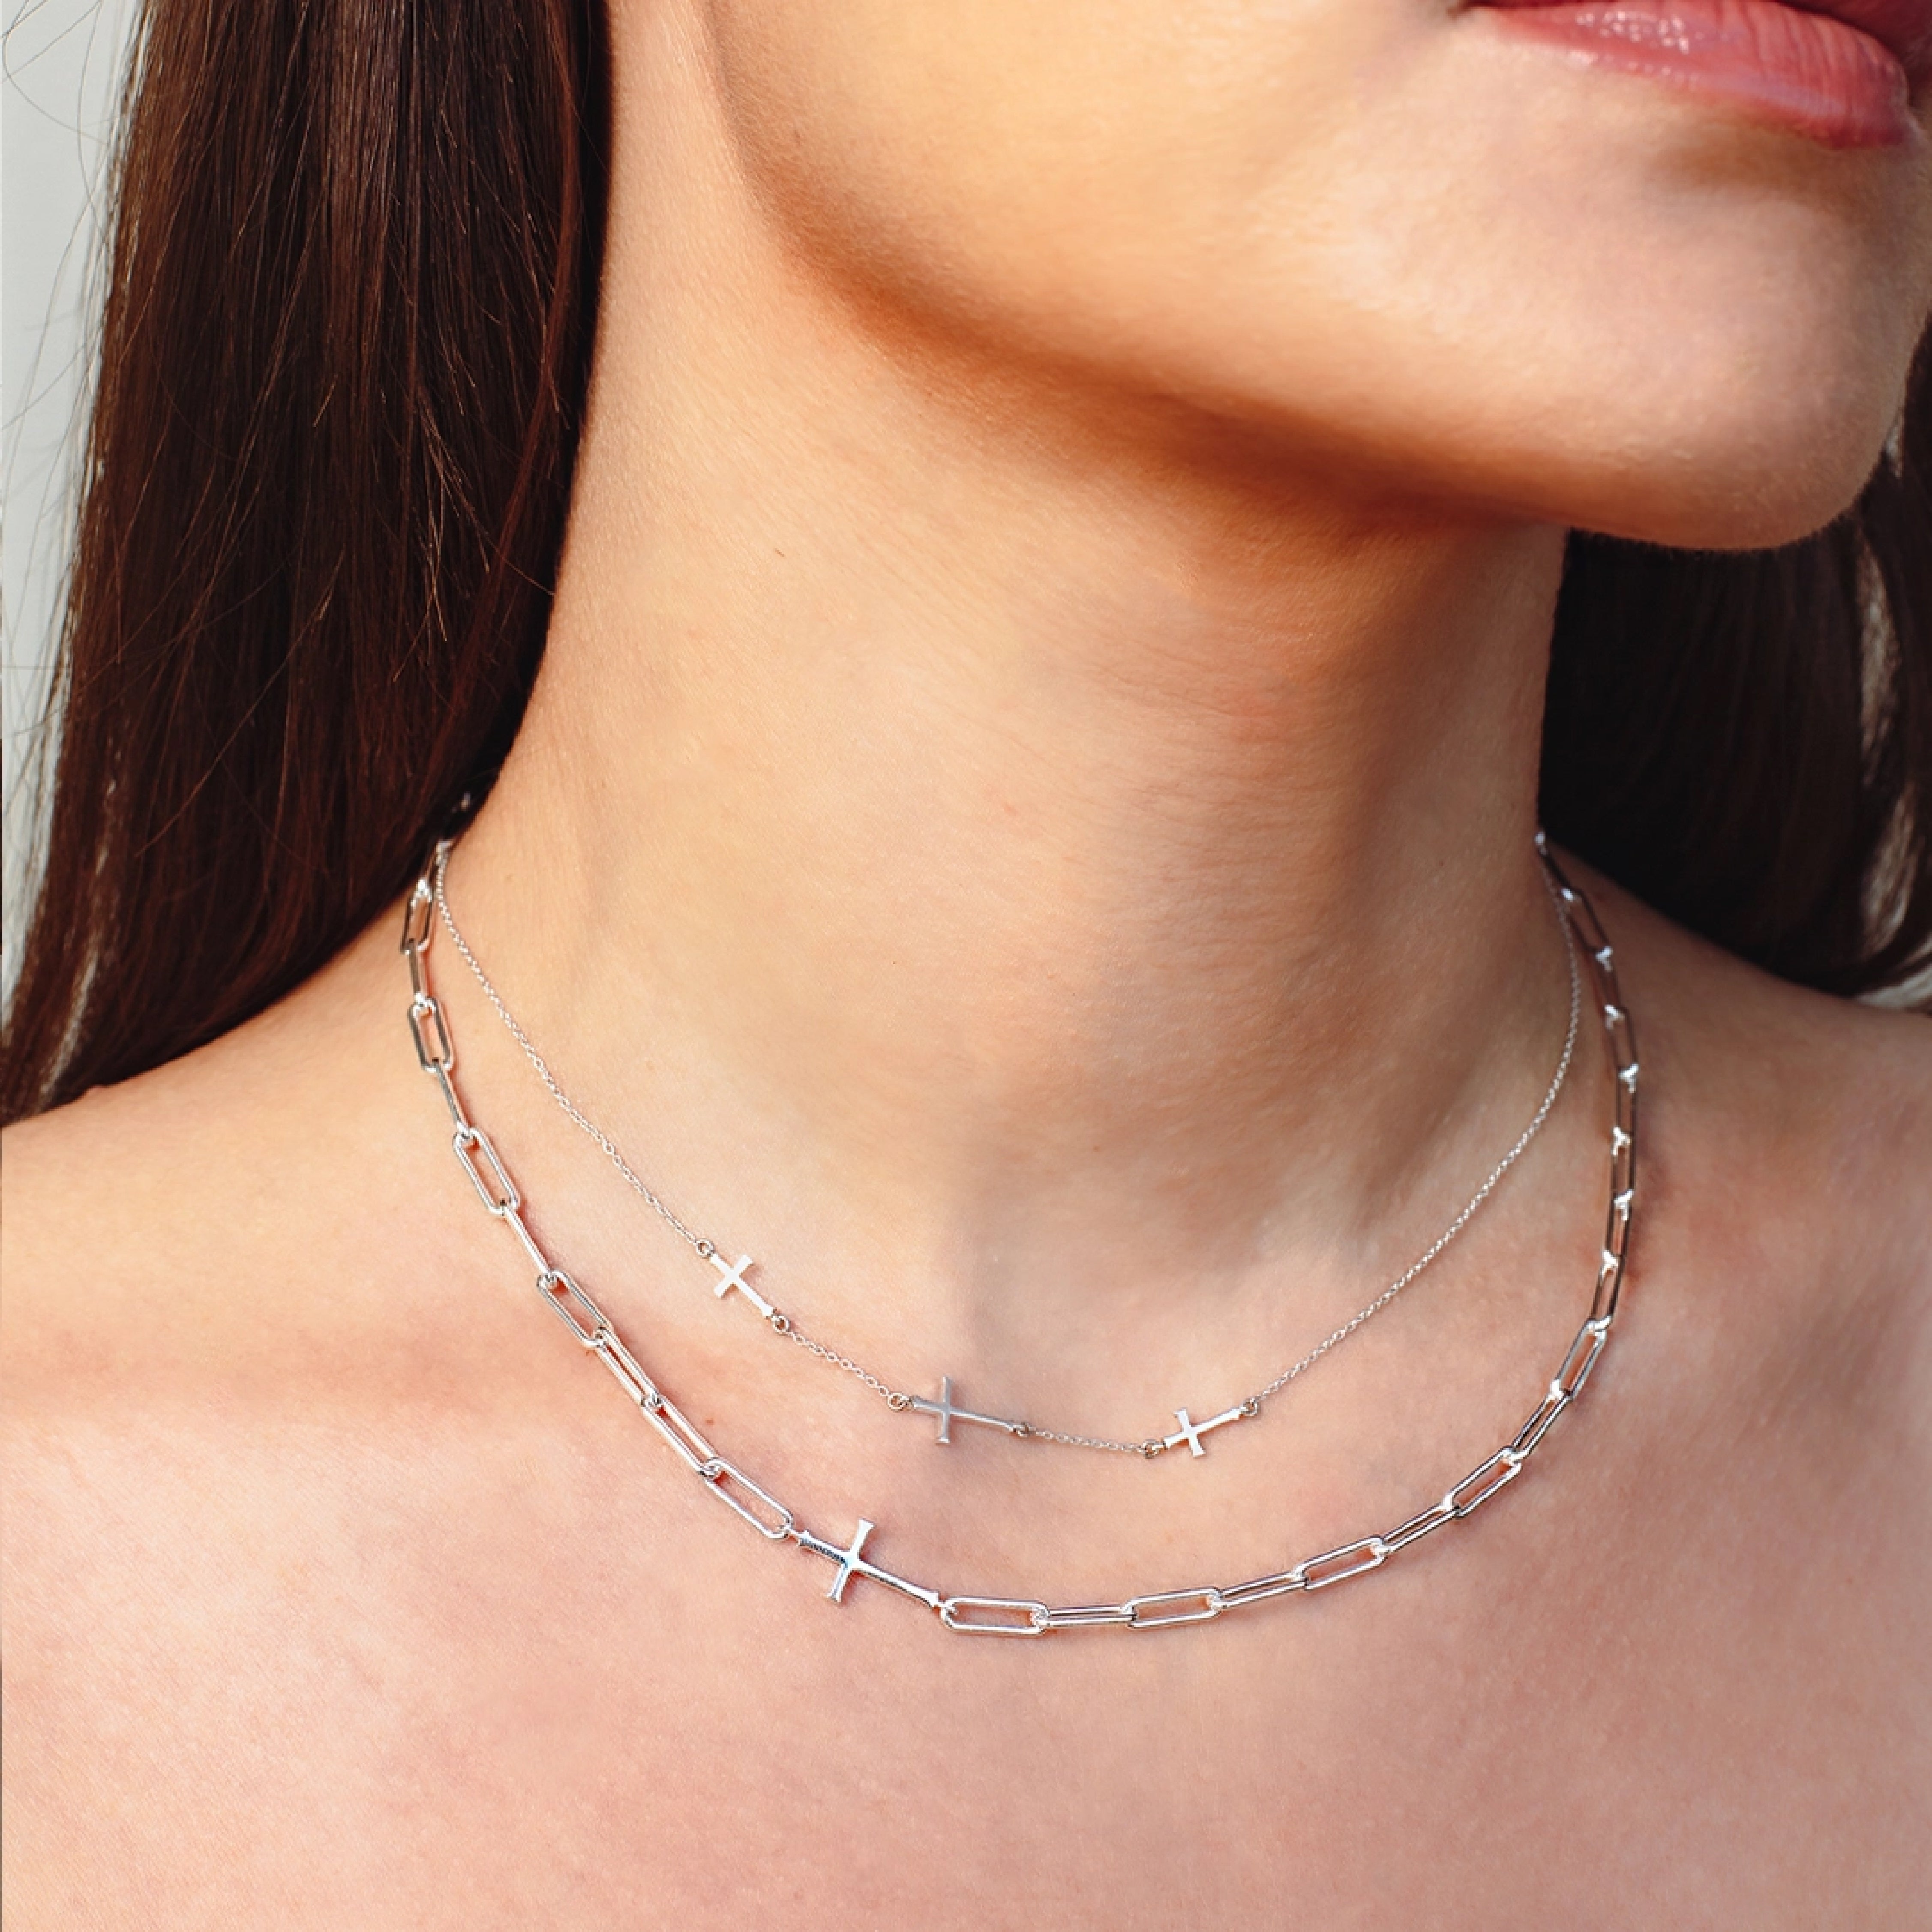 Close up of a christian woman wearing the chain breaker and calvary cross station necklaces in sterling silver from the calvary collection by Rizen Jewelry